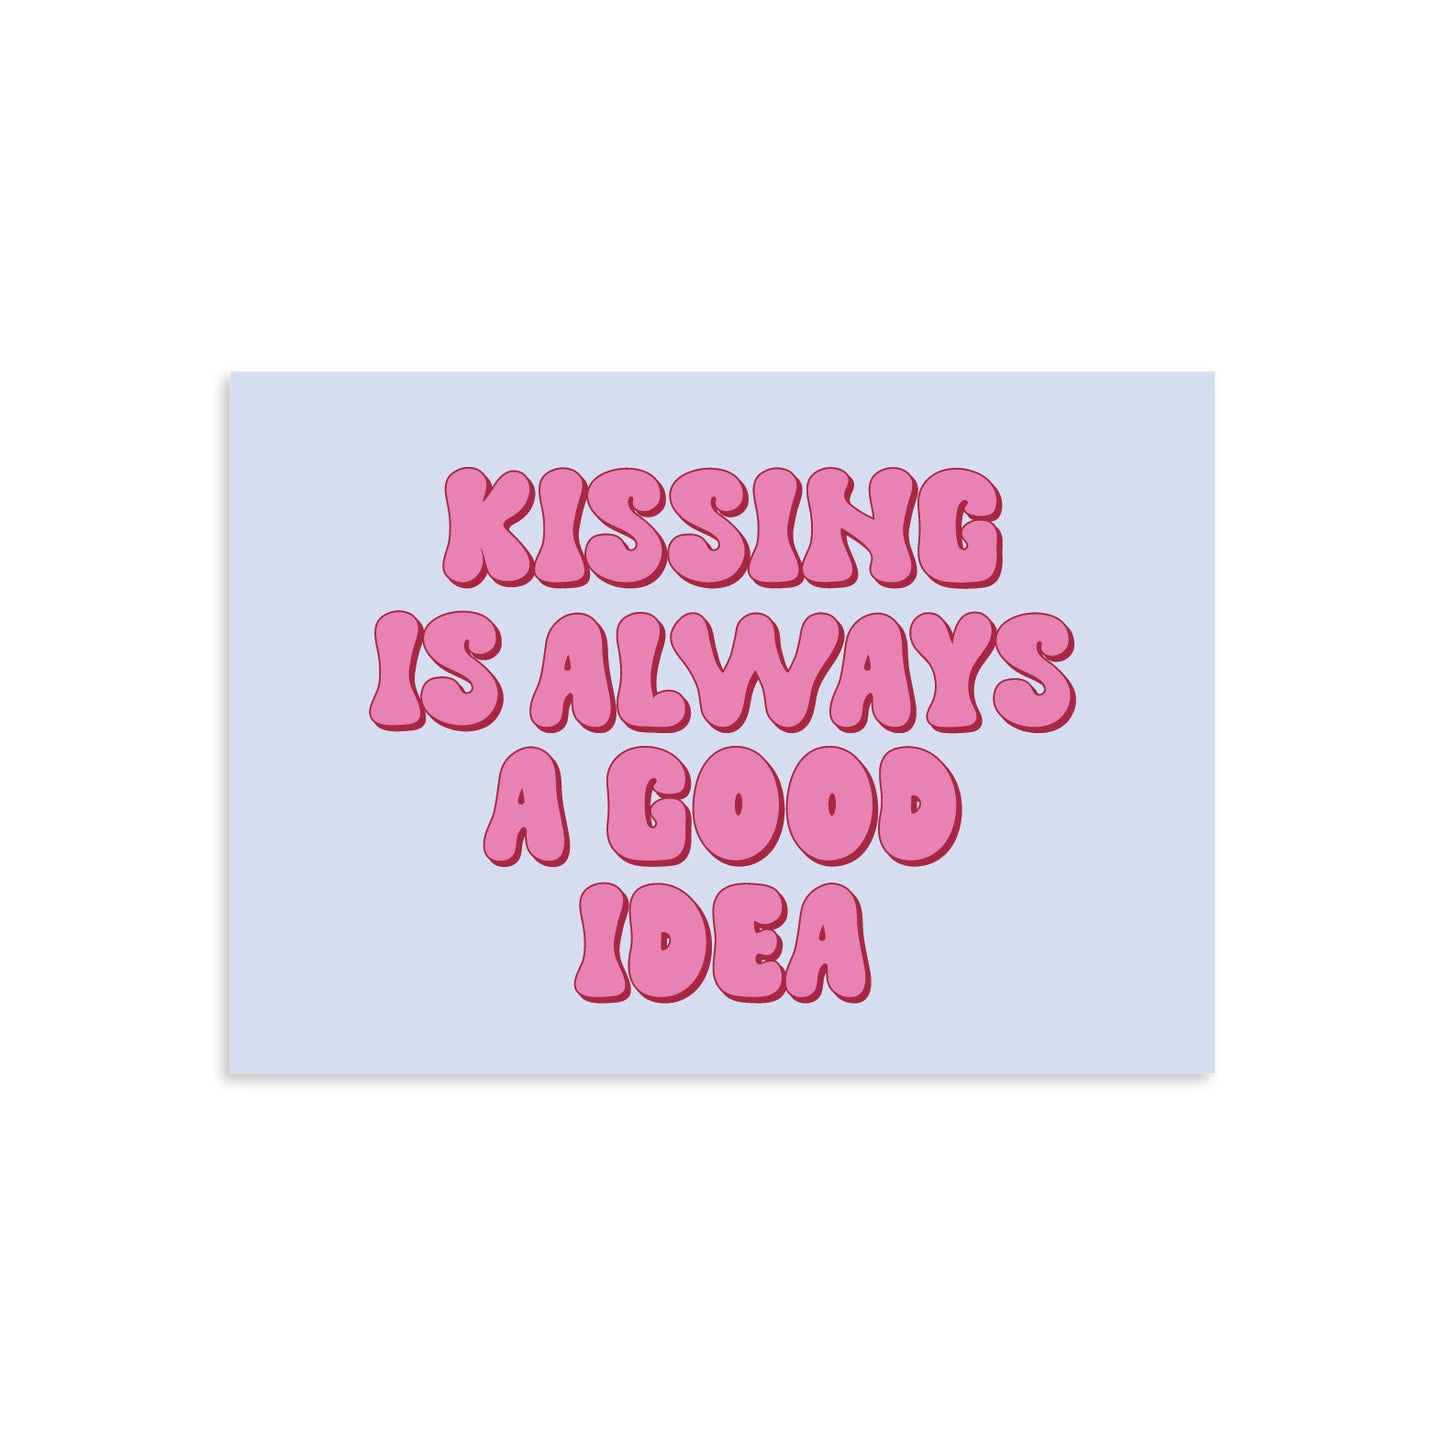 Kissing is always a Good Idea A4 Poster